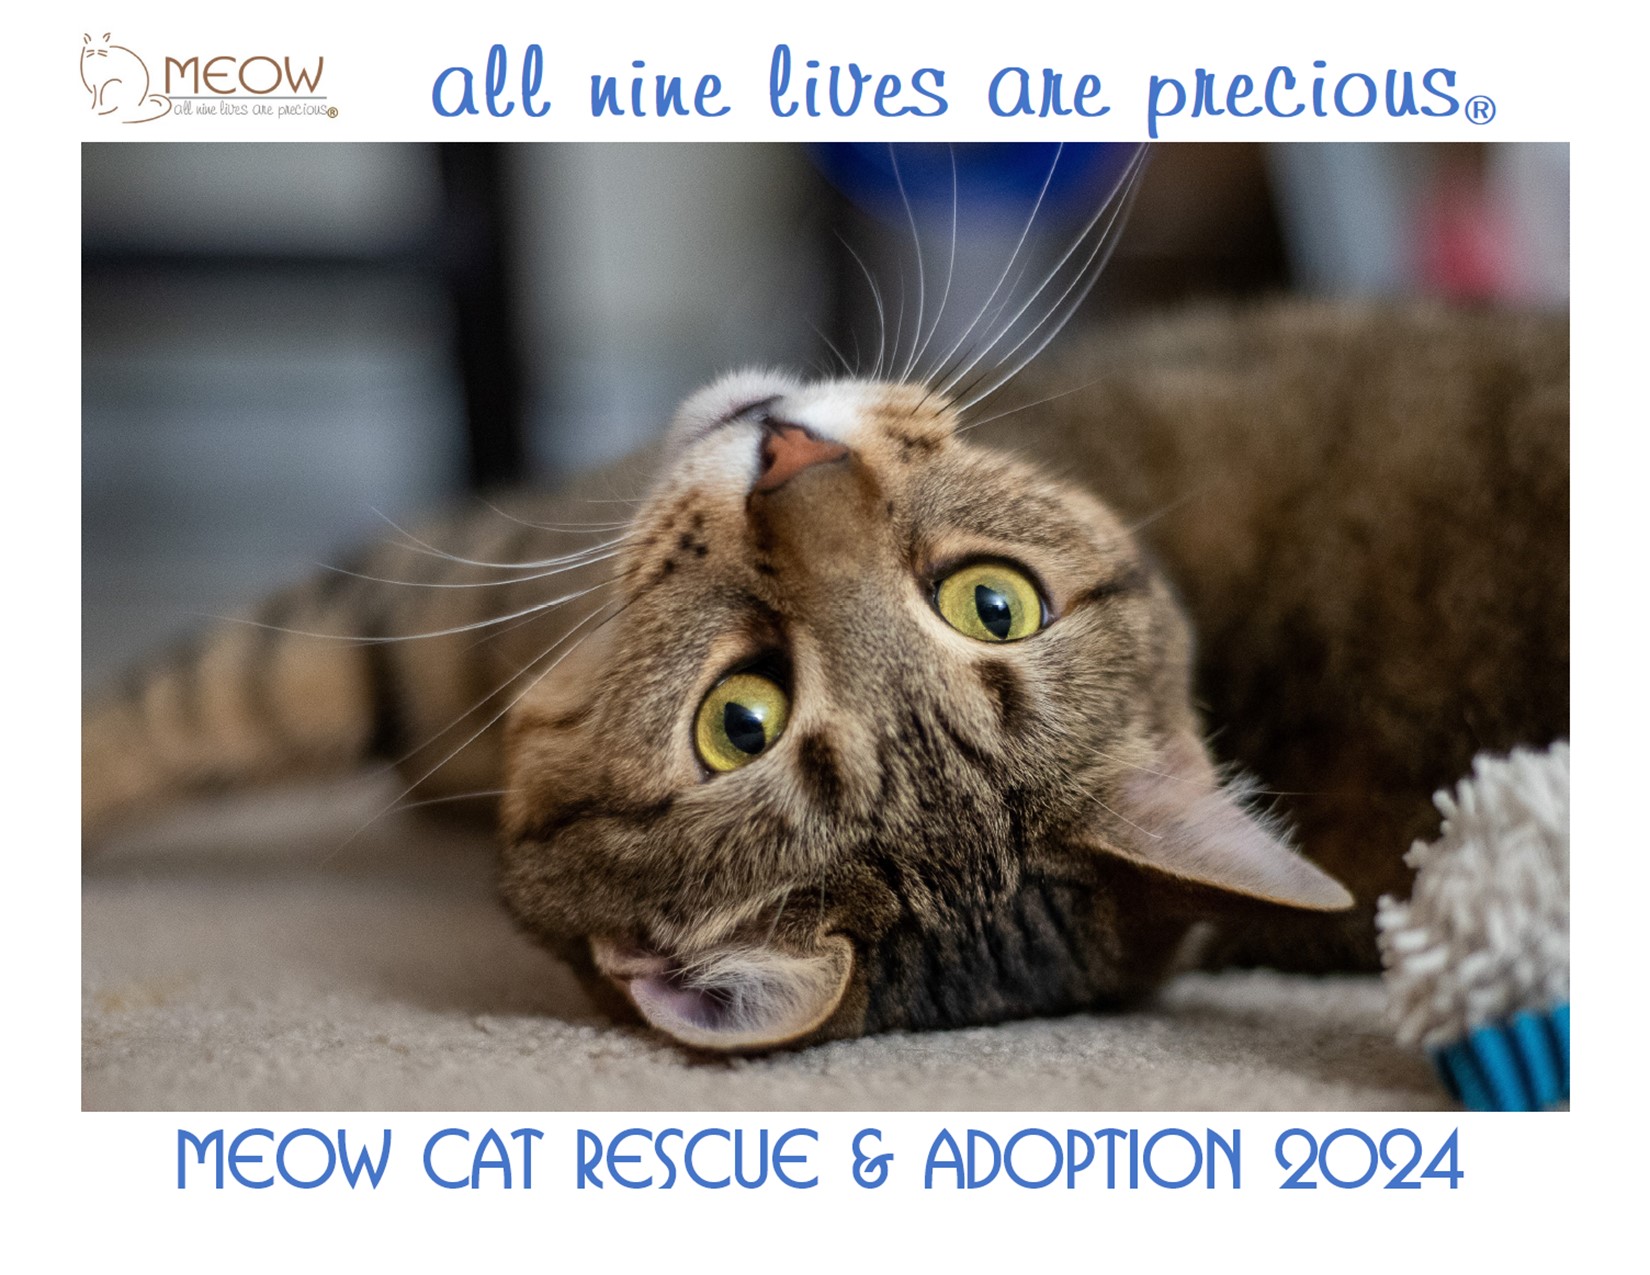 ADOPT  Mission Meow Cats